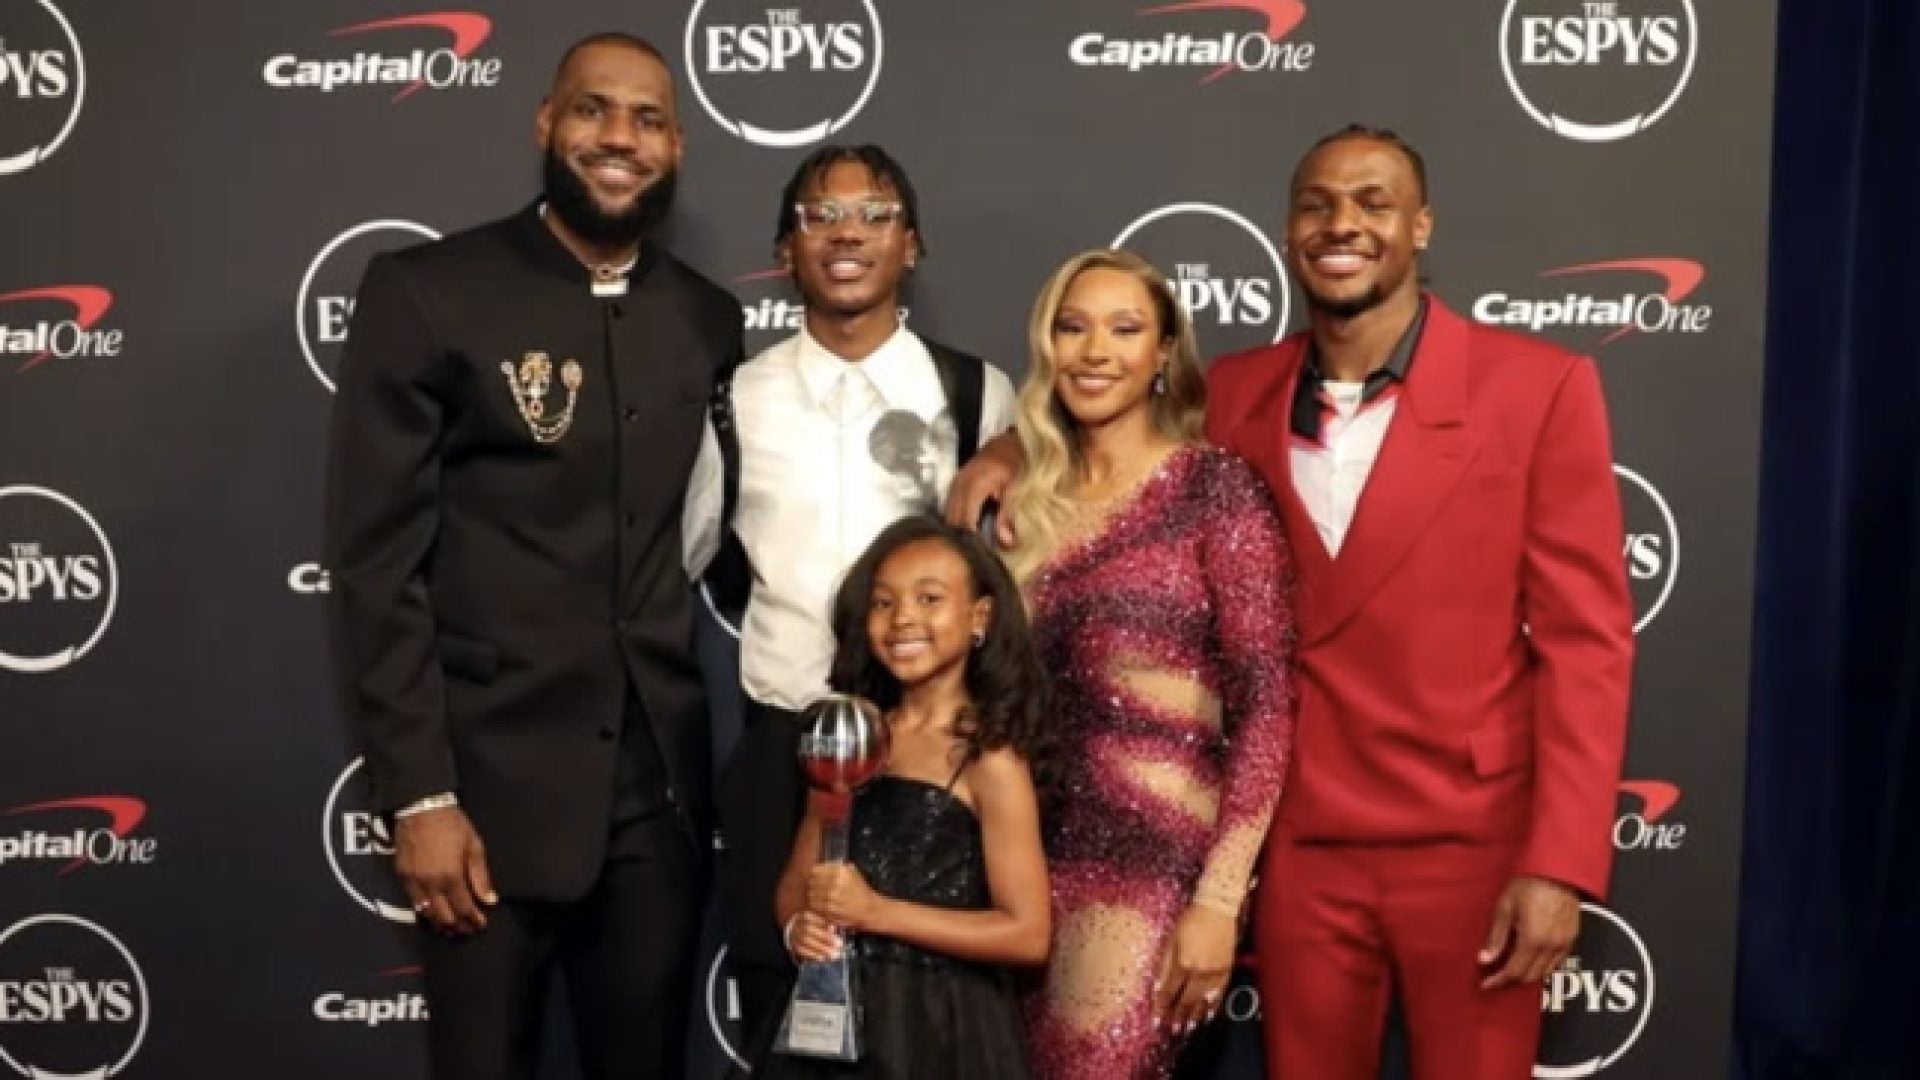 WATCH: In My Feed – Ballers’ Biggest Night: Couples At The ESPYs